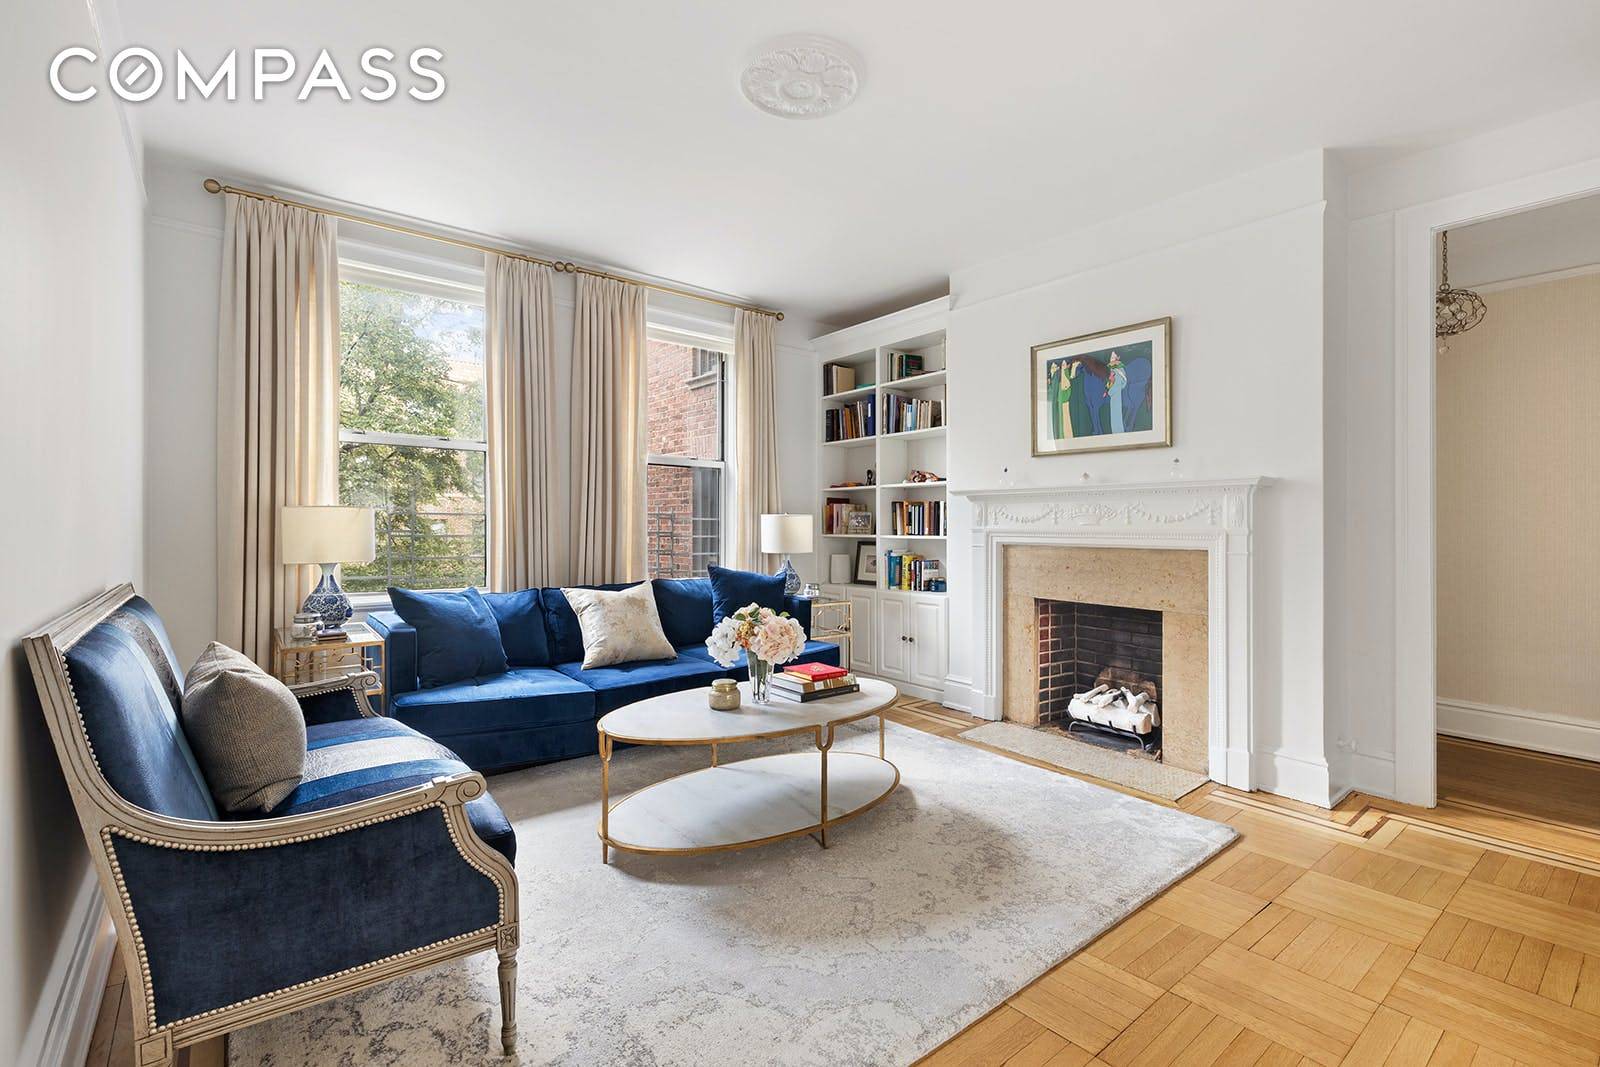 Elegant Upper West Side living without the Manhattan price rarely seen beautiful 2 bedroom, 1 bath co op with an extra sunroom that easily converts to a home office or ...